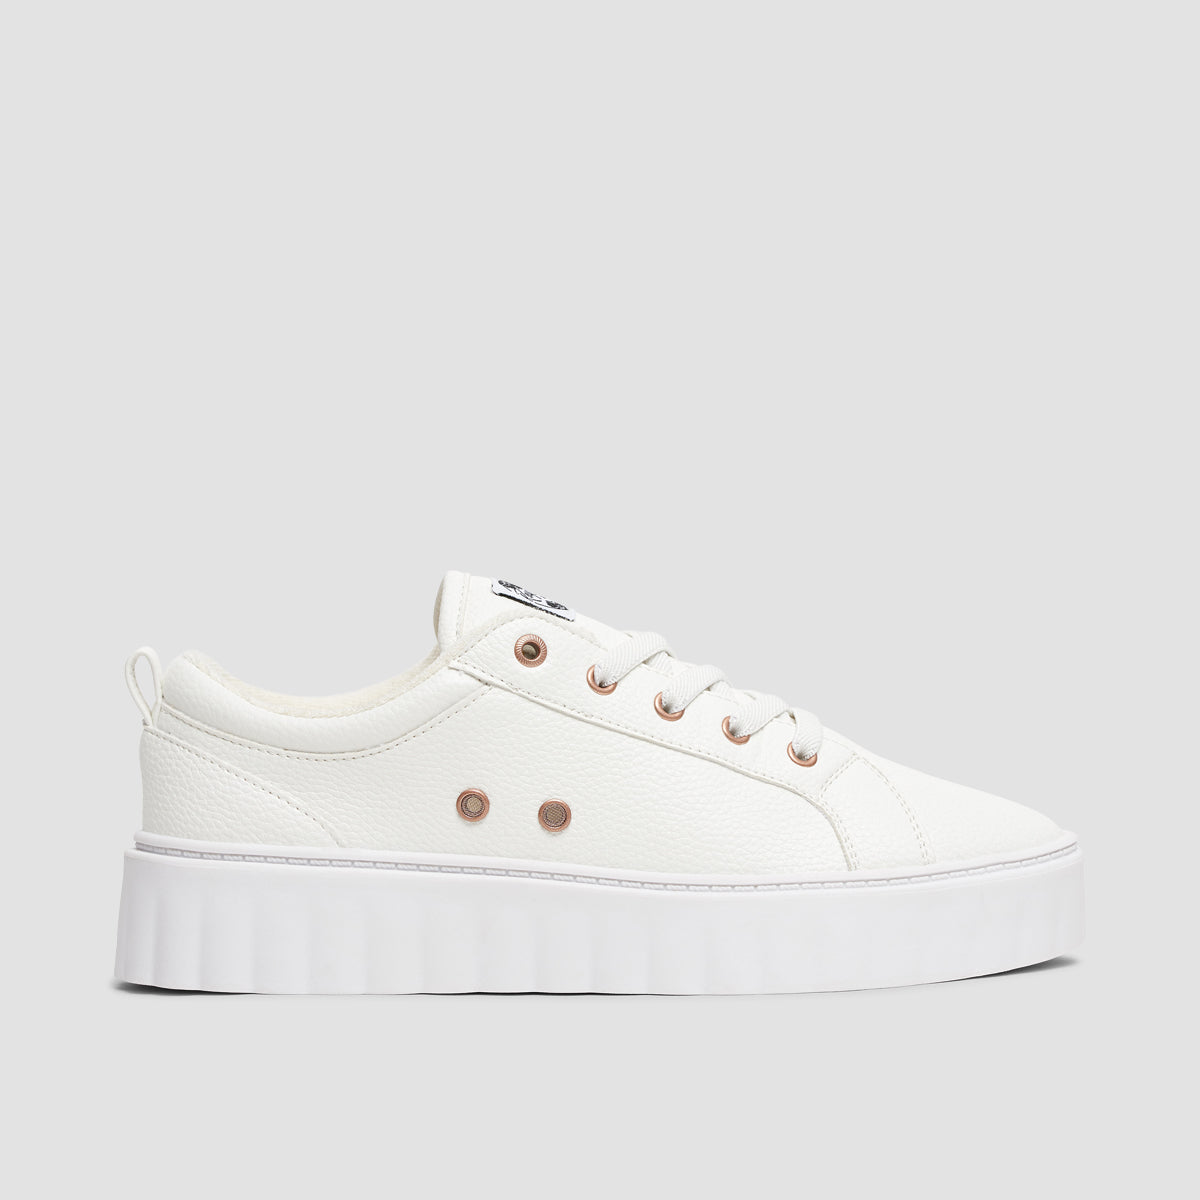 Roxy Sheilahh Shoes - White - Womens